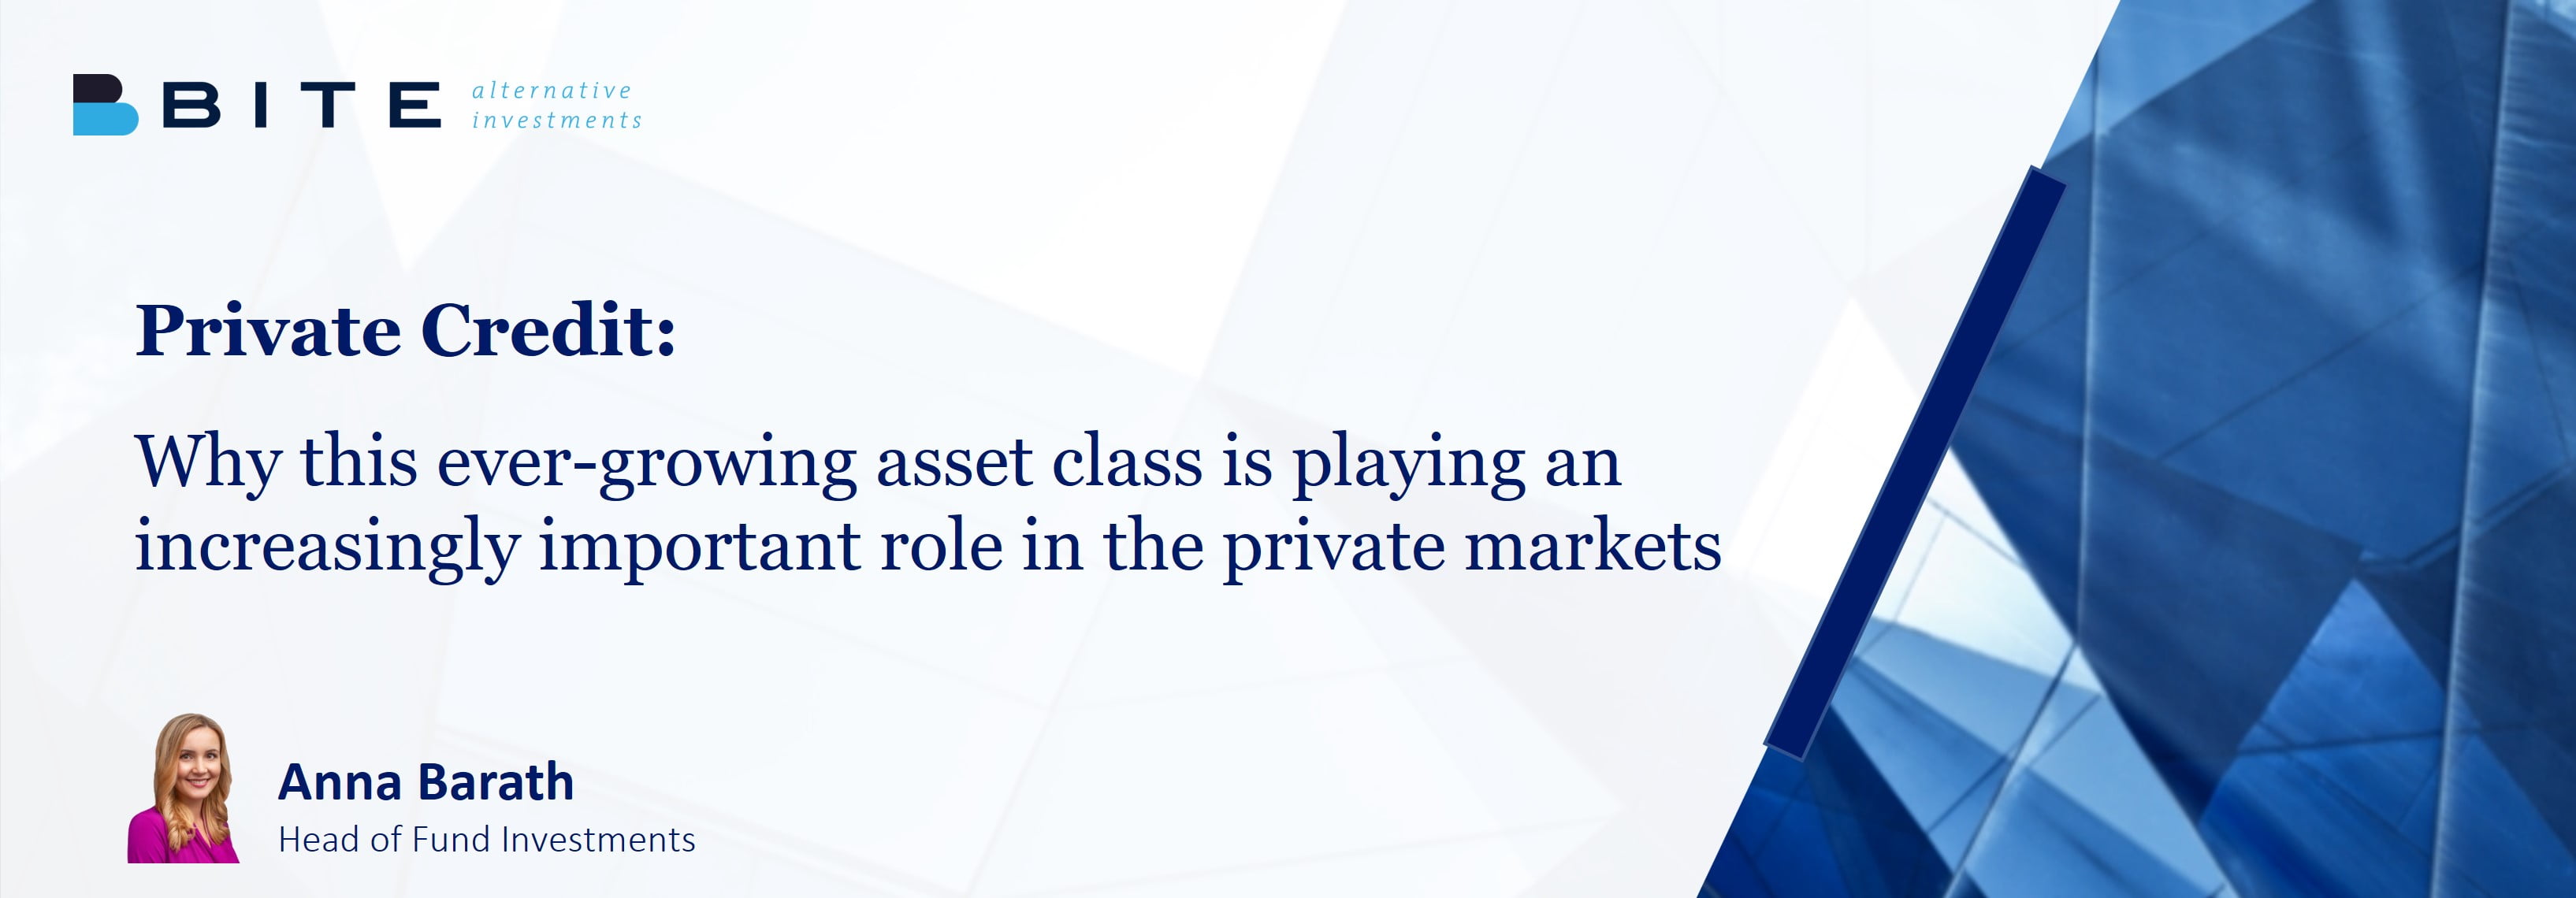 Private Credit: Why this ever-growing asset class is playing an increasingly important role in the private markets